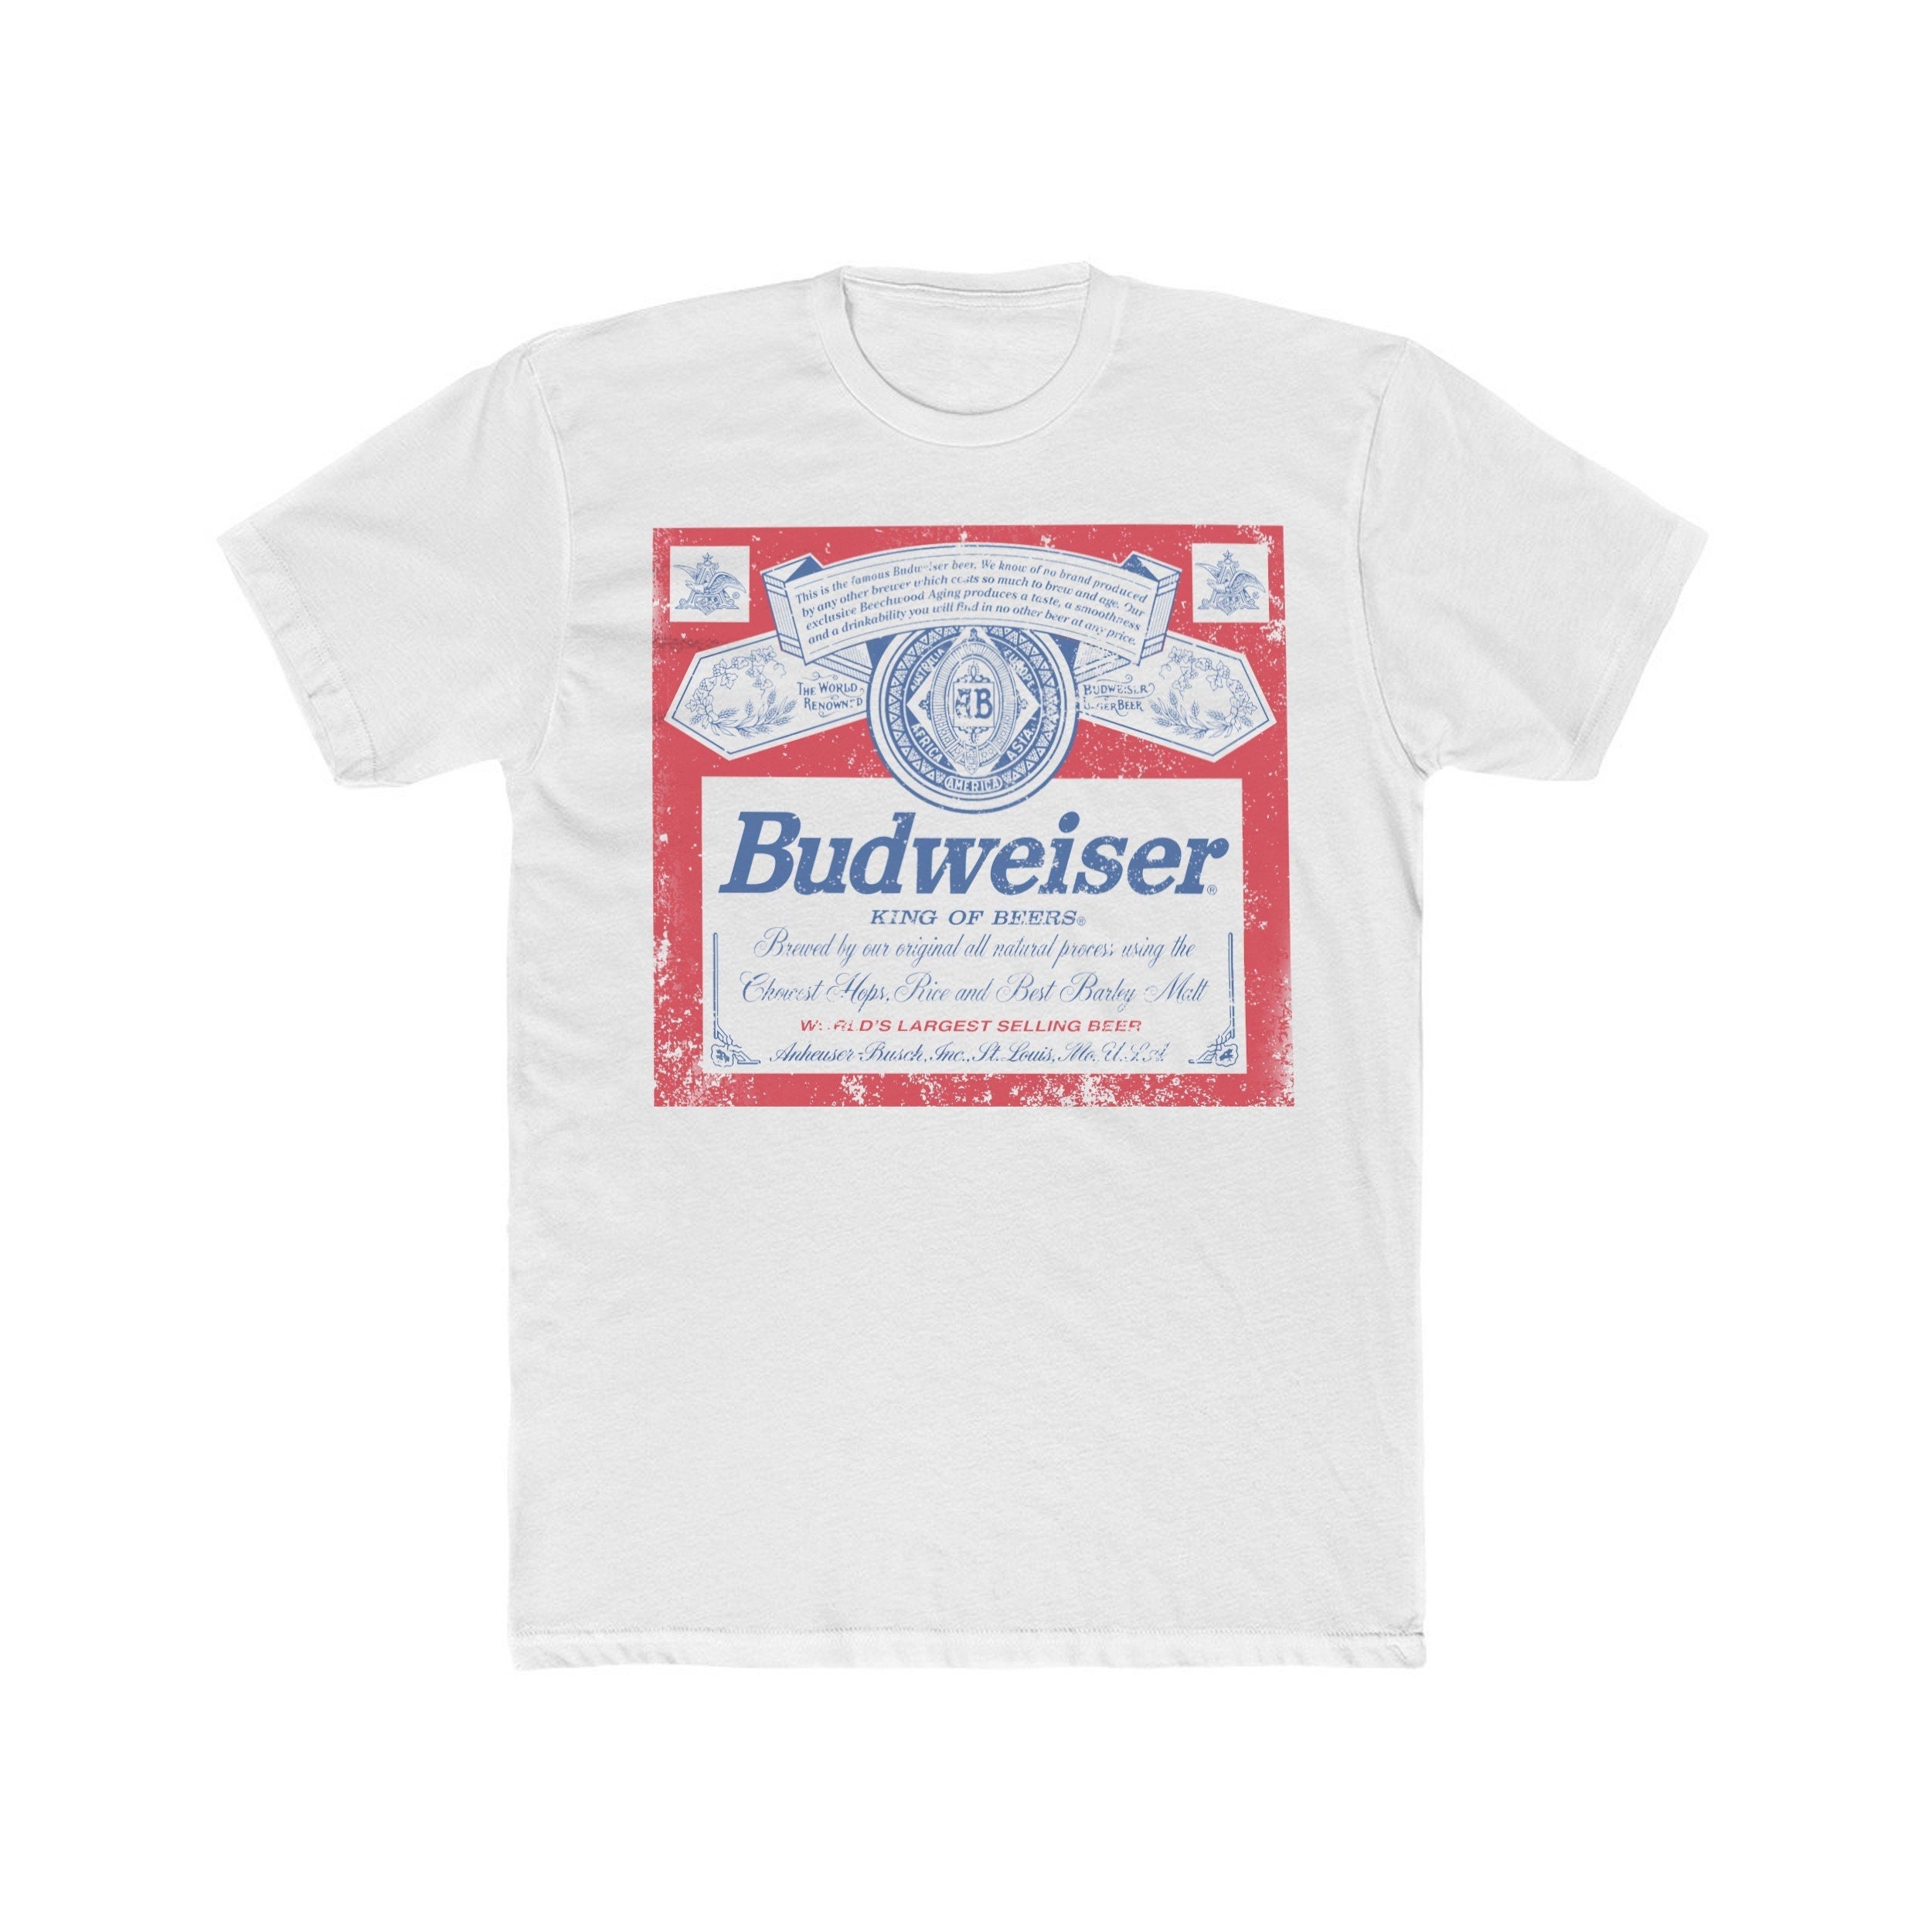 Budweiser Beers Classic Vintage Style Beer T-shirt